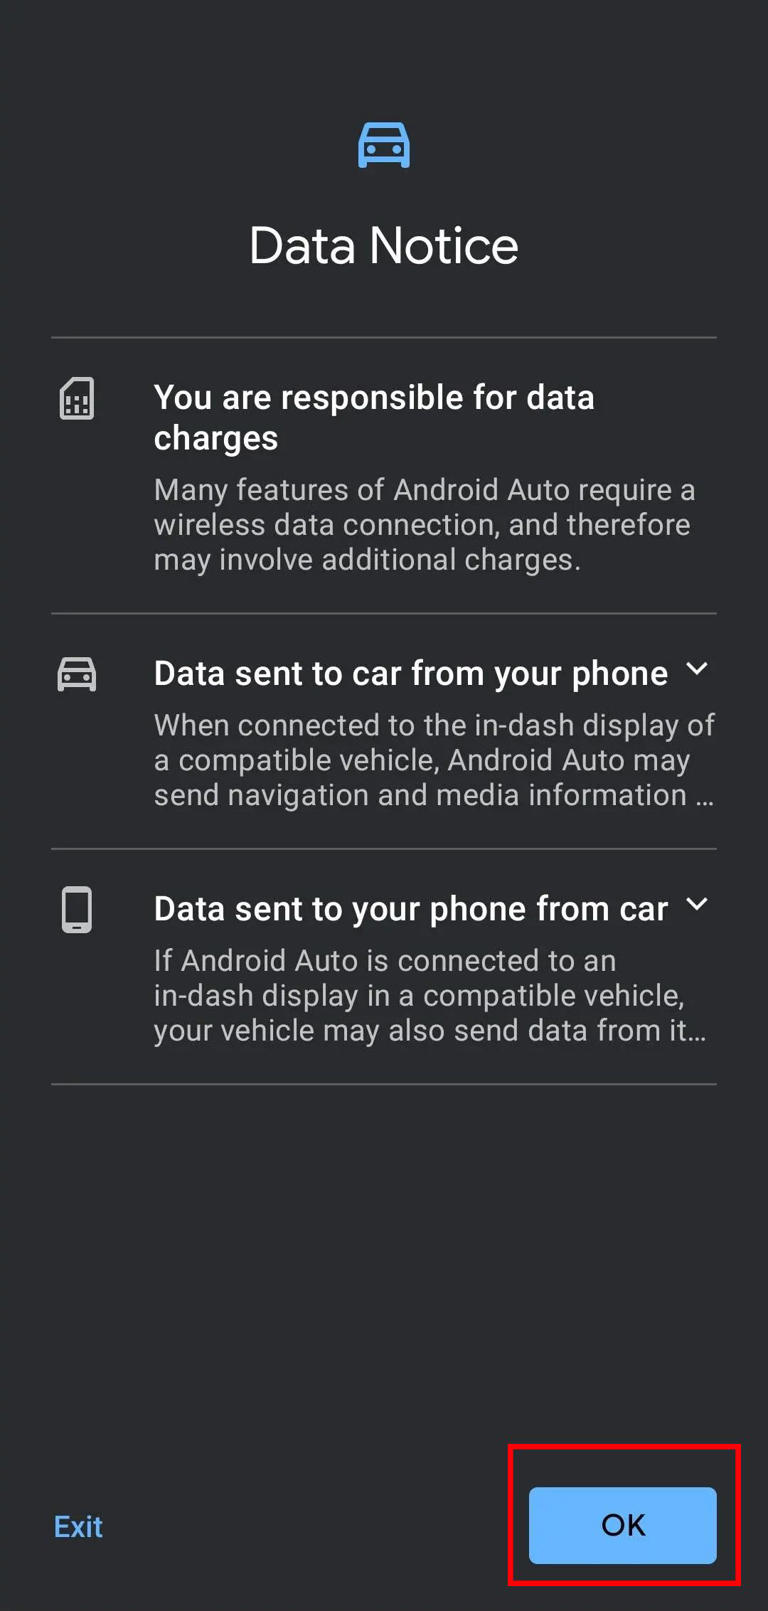 An Android Auto data notice is shown, informing the user that they are responsible for any data charges and that many features require a wireless data connection.